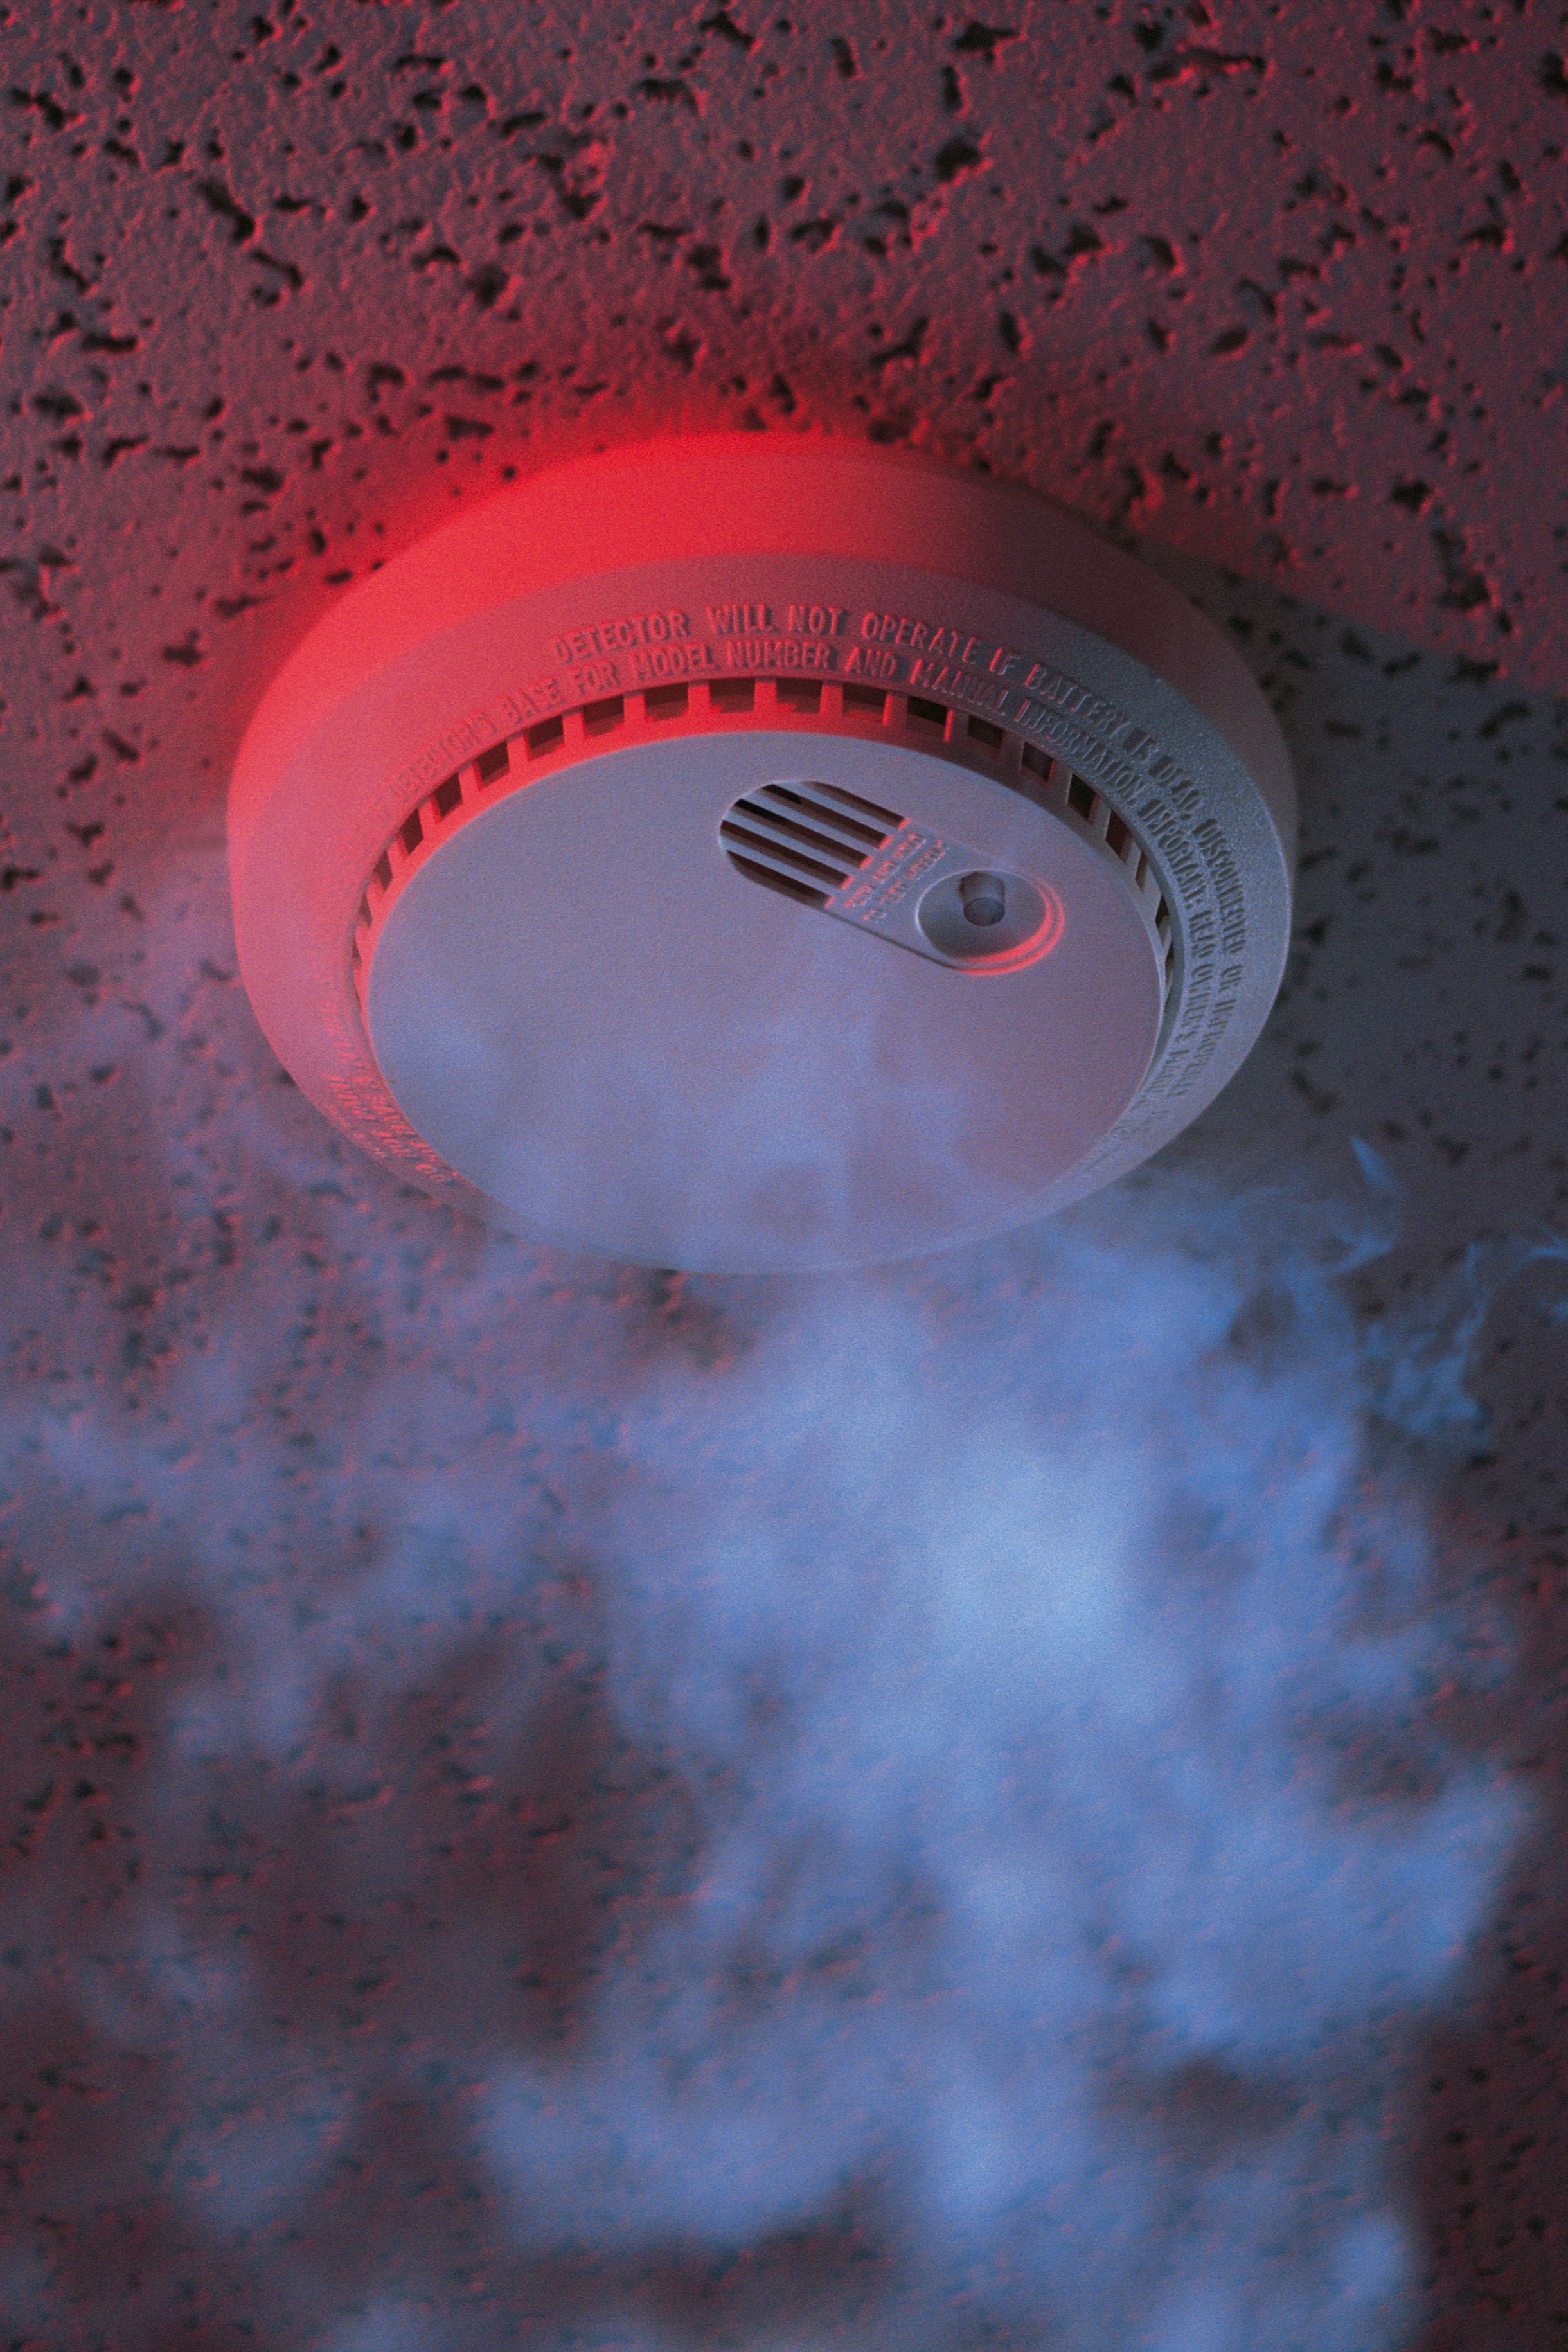 Annual Fire Safety. Smoke alarms, Fire alarm